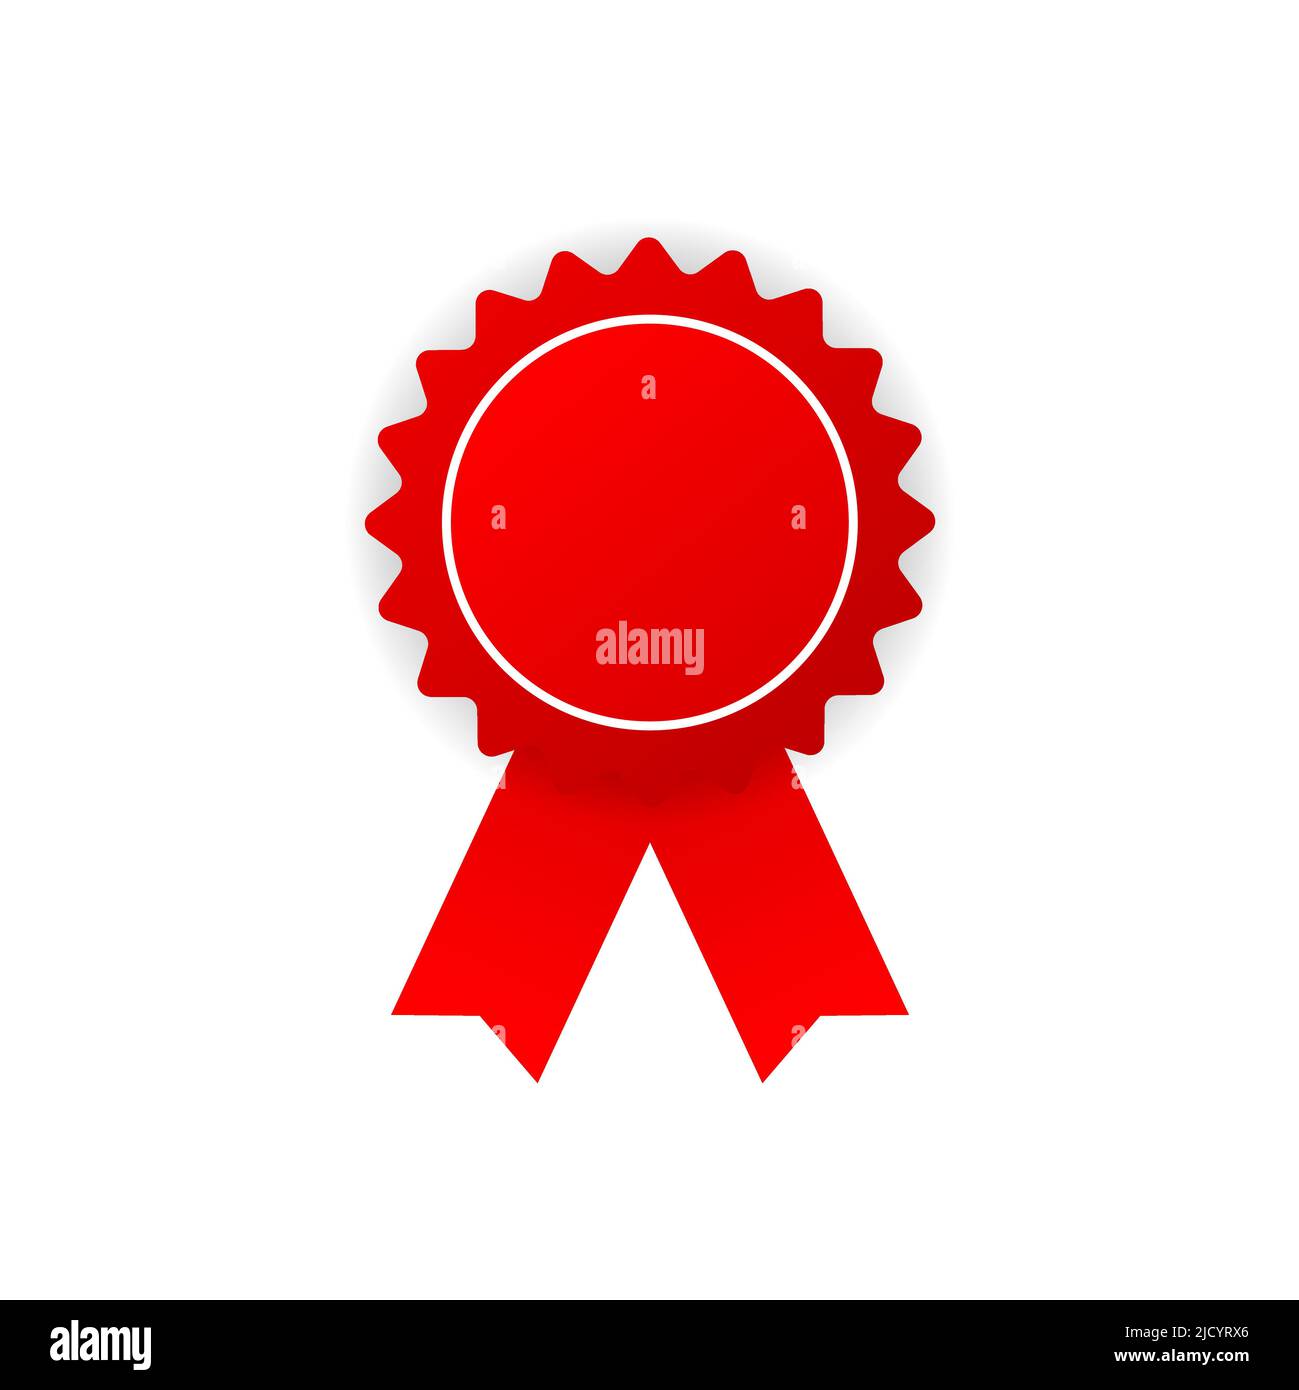 Approved or Certified Medal Icon. Stock Vector